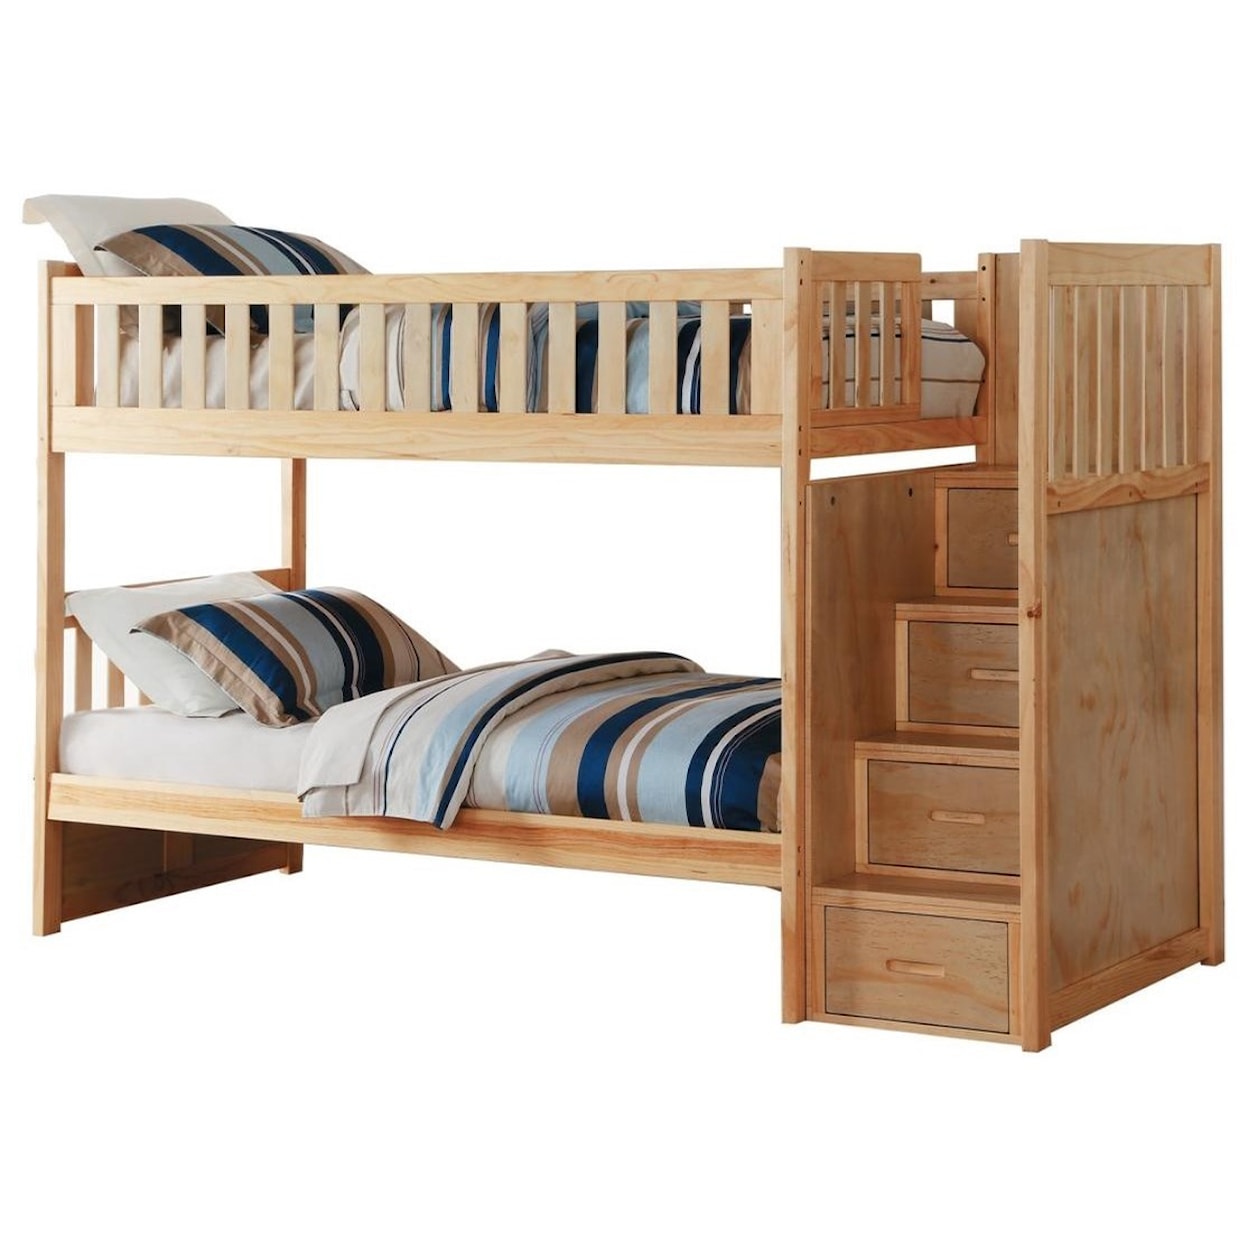 Homelegance Bartly Twin Over Twin Bunk Bed